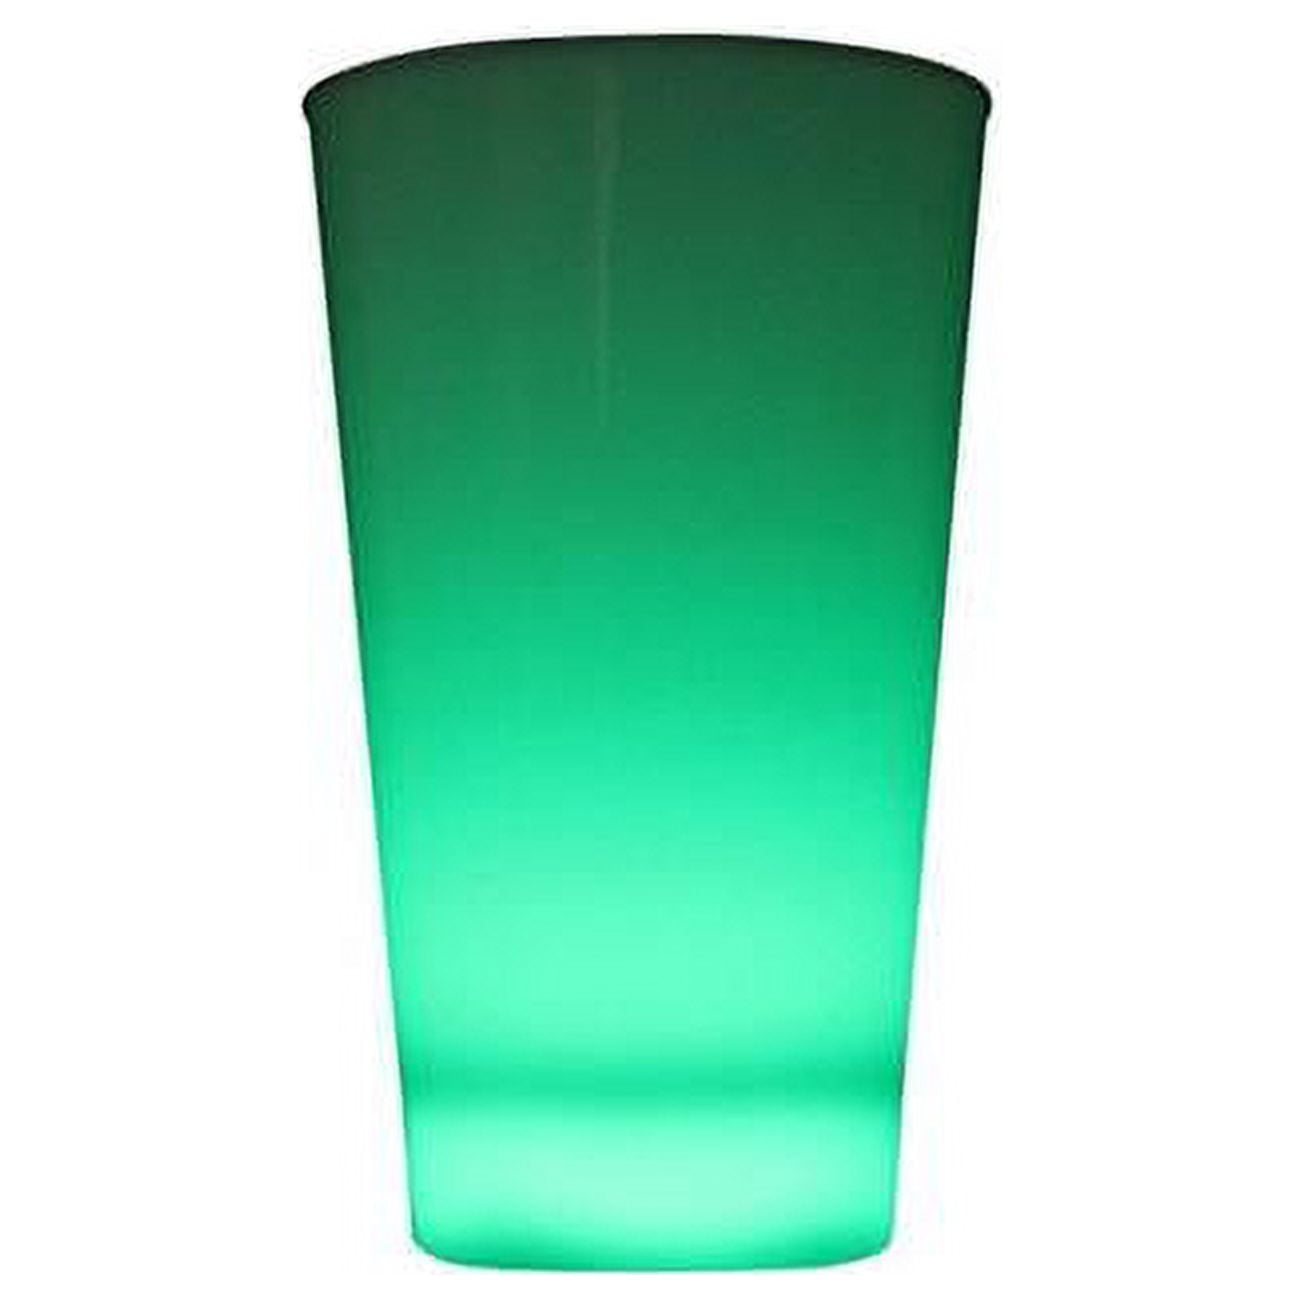 Picture of Blinkee GlowCup-Gr Green Flash Light Up Party LED Glow Cup for Birthday Party Cinco De Mayo